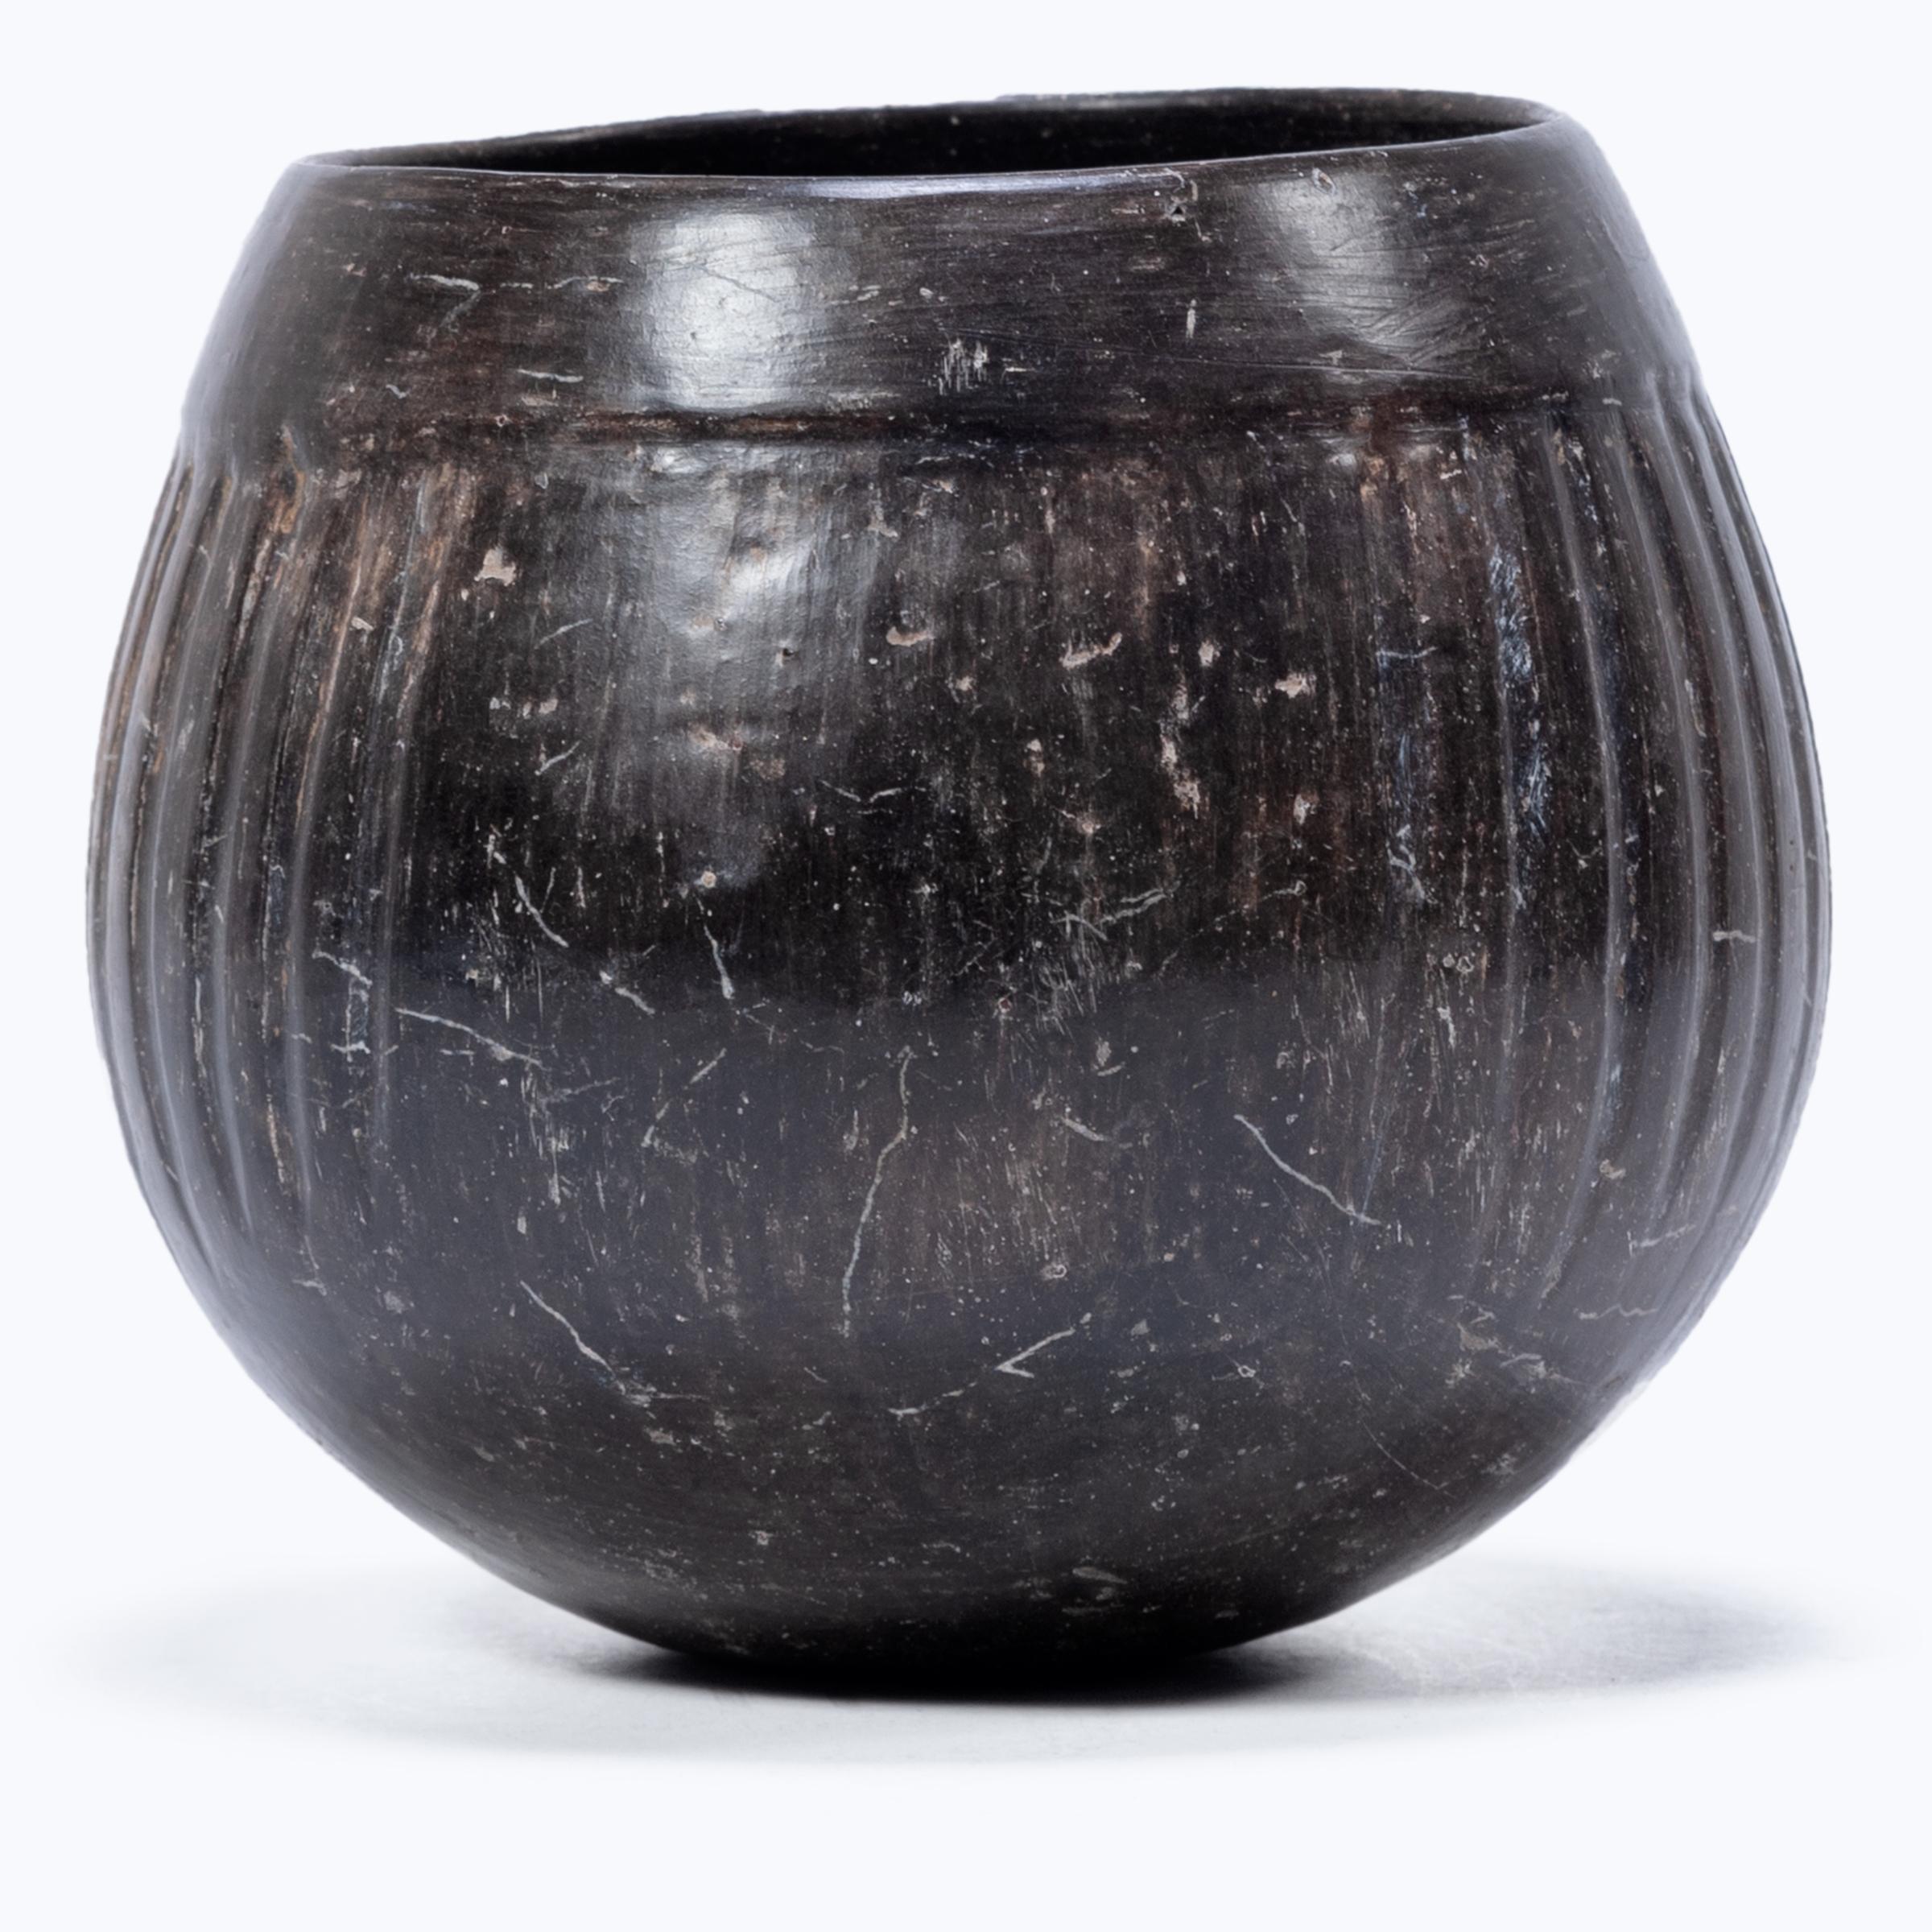 Exhibiting a rich patina, this petite blackware vessel shows many telltale signs of Pre-Columbian pottery. The darkened surface was achieved by applying a mineral-rich slip for a monochrome finish that designates the vessel as an everyday object.